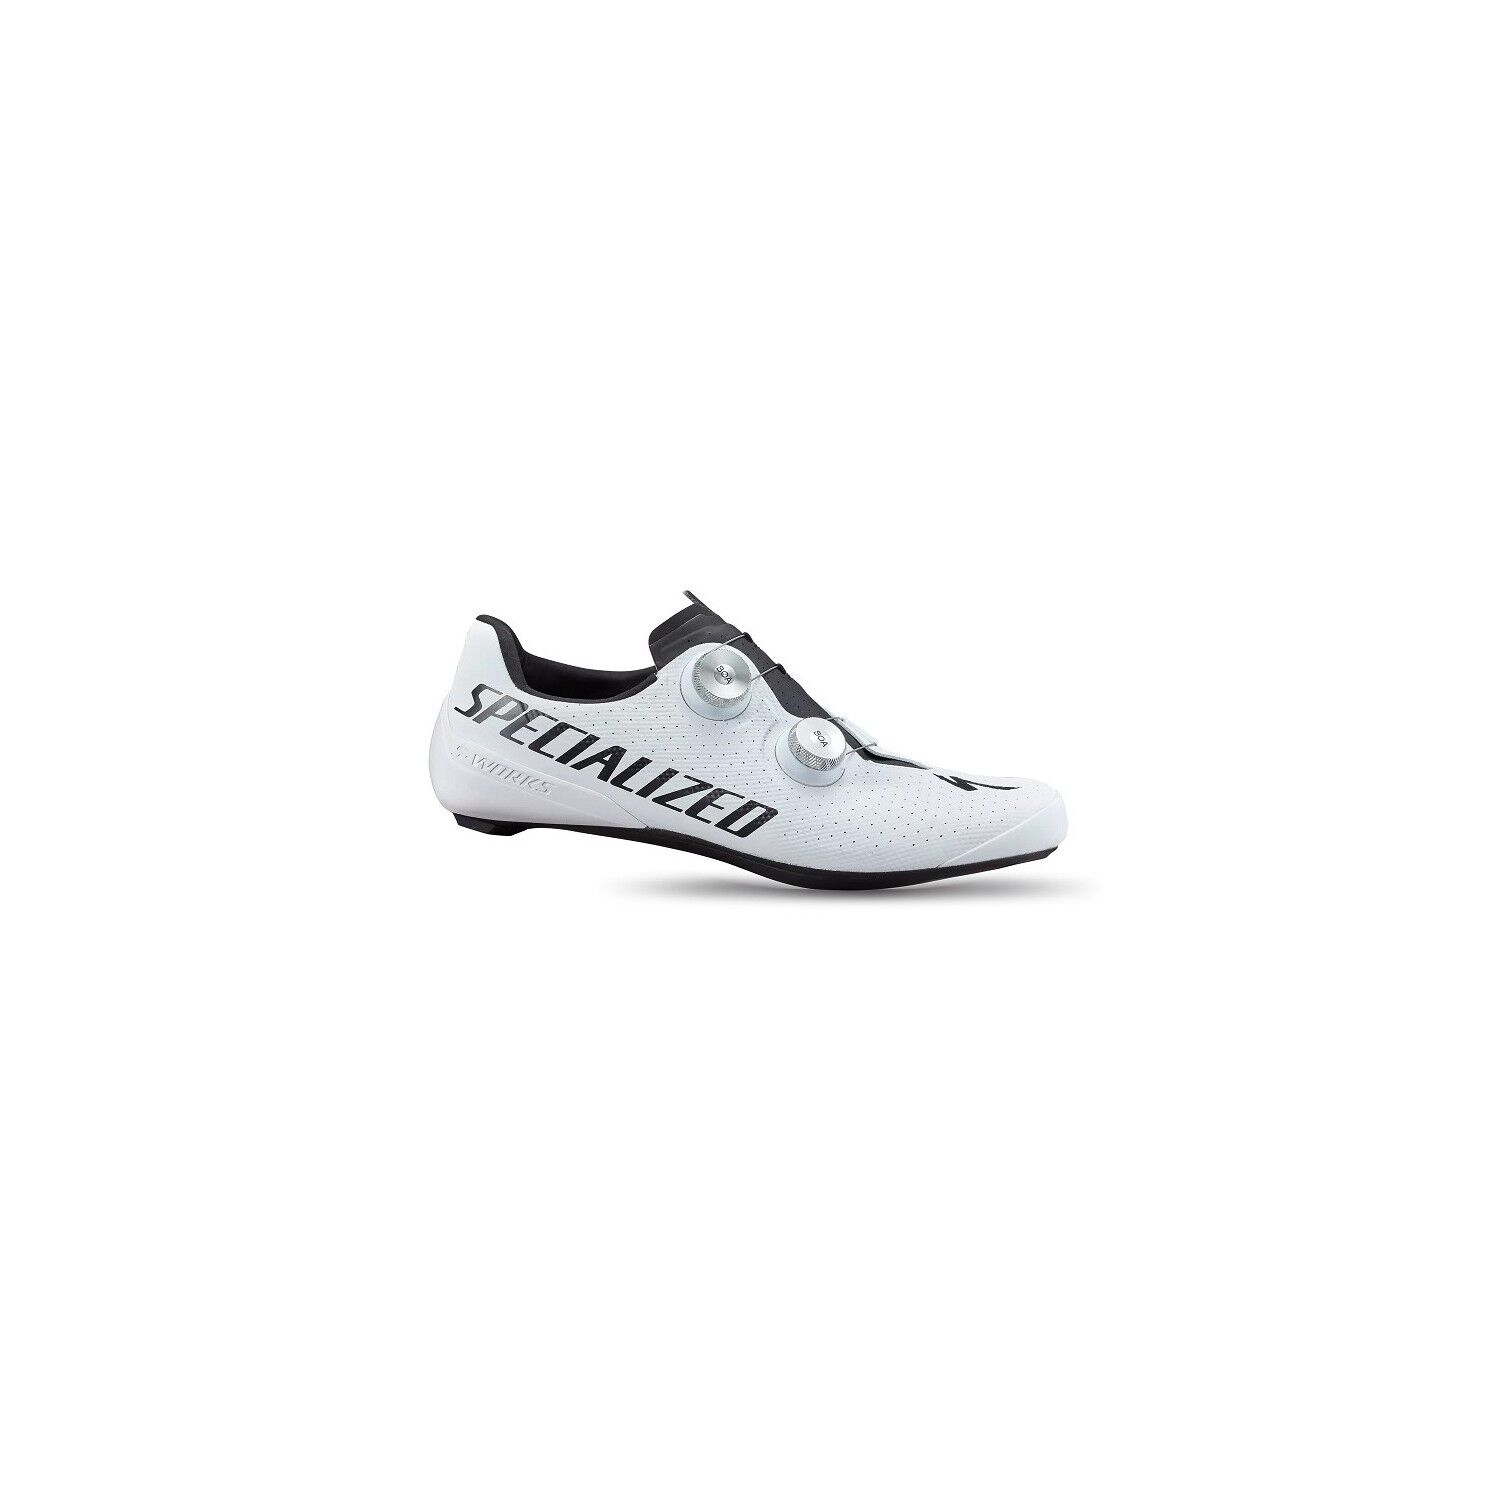 SPECIALIZED Chaussures Vélo Route S-Works Torch 2023 – Taille 45,5 Neuf segunda | Biked